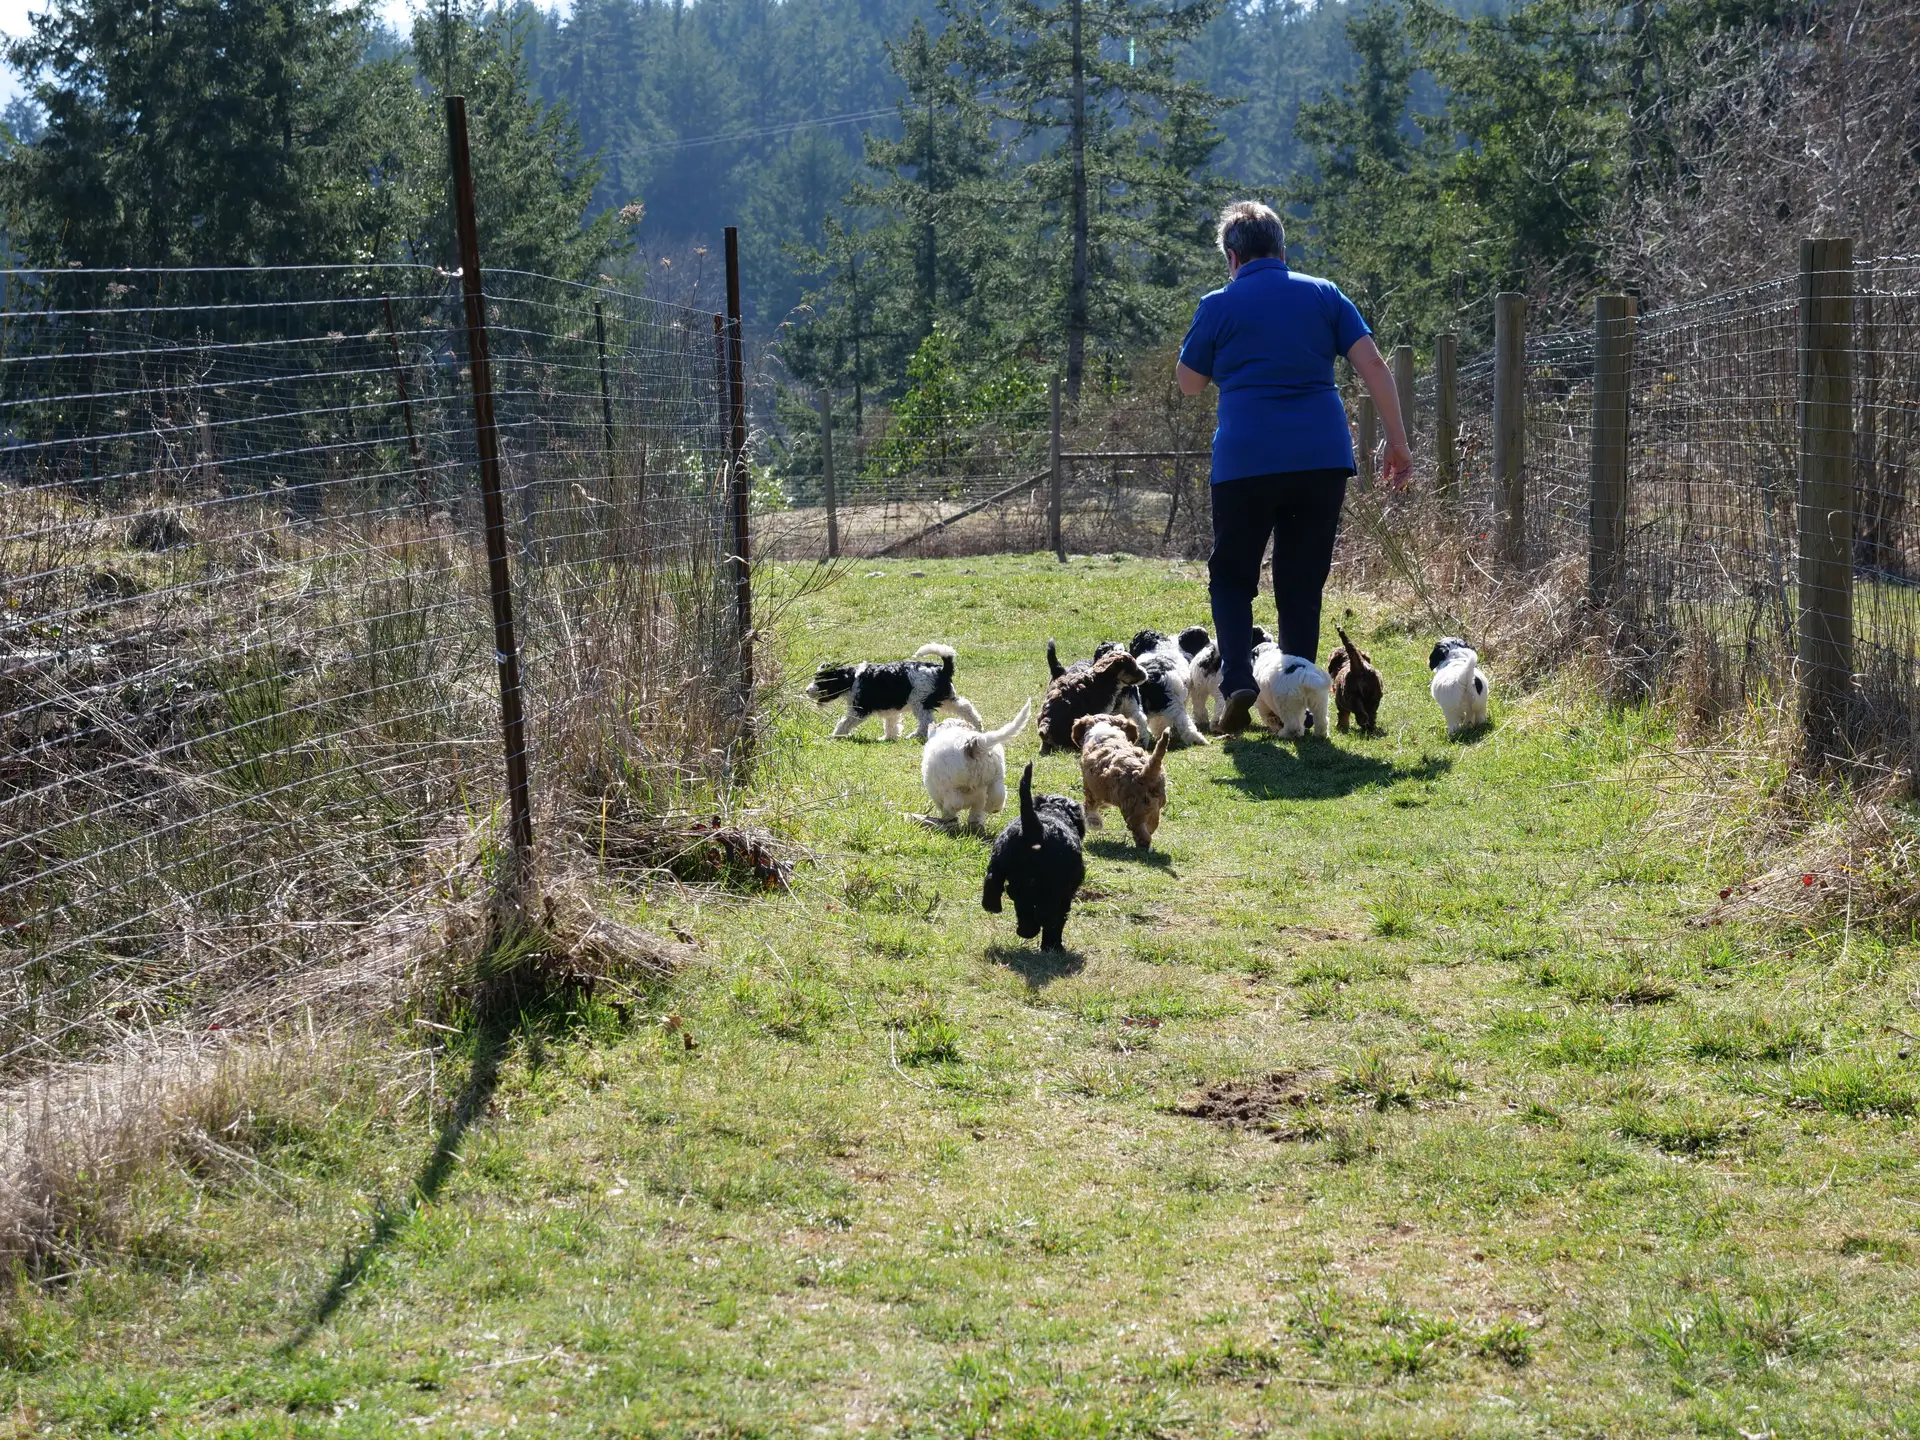 Claire, wearing a blue shirt, in the distance is walking with 11 six-week old labradoodle puppies across green grass. Trees in the background and bright blue sky. The puppies are running away from the camera.